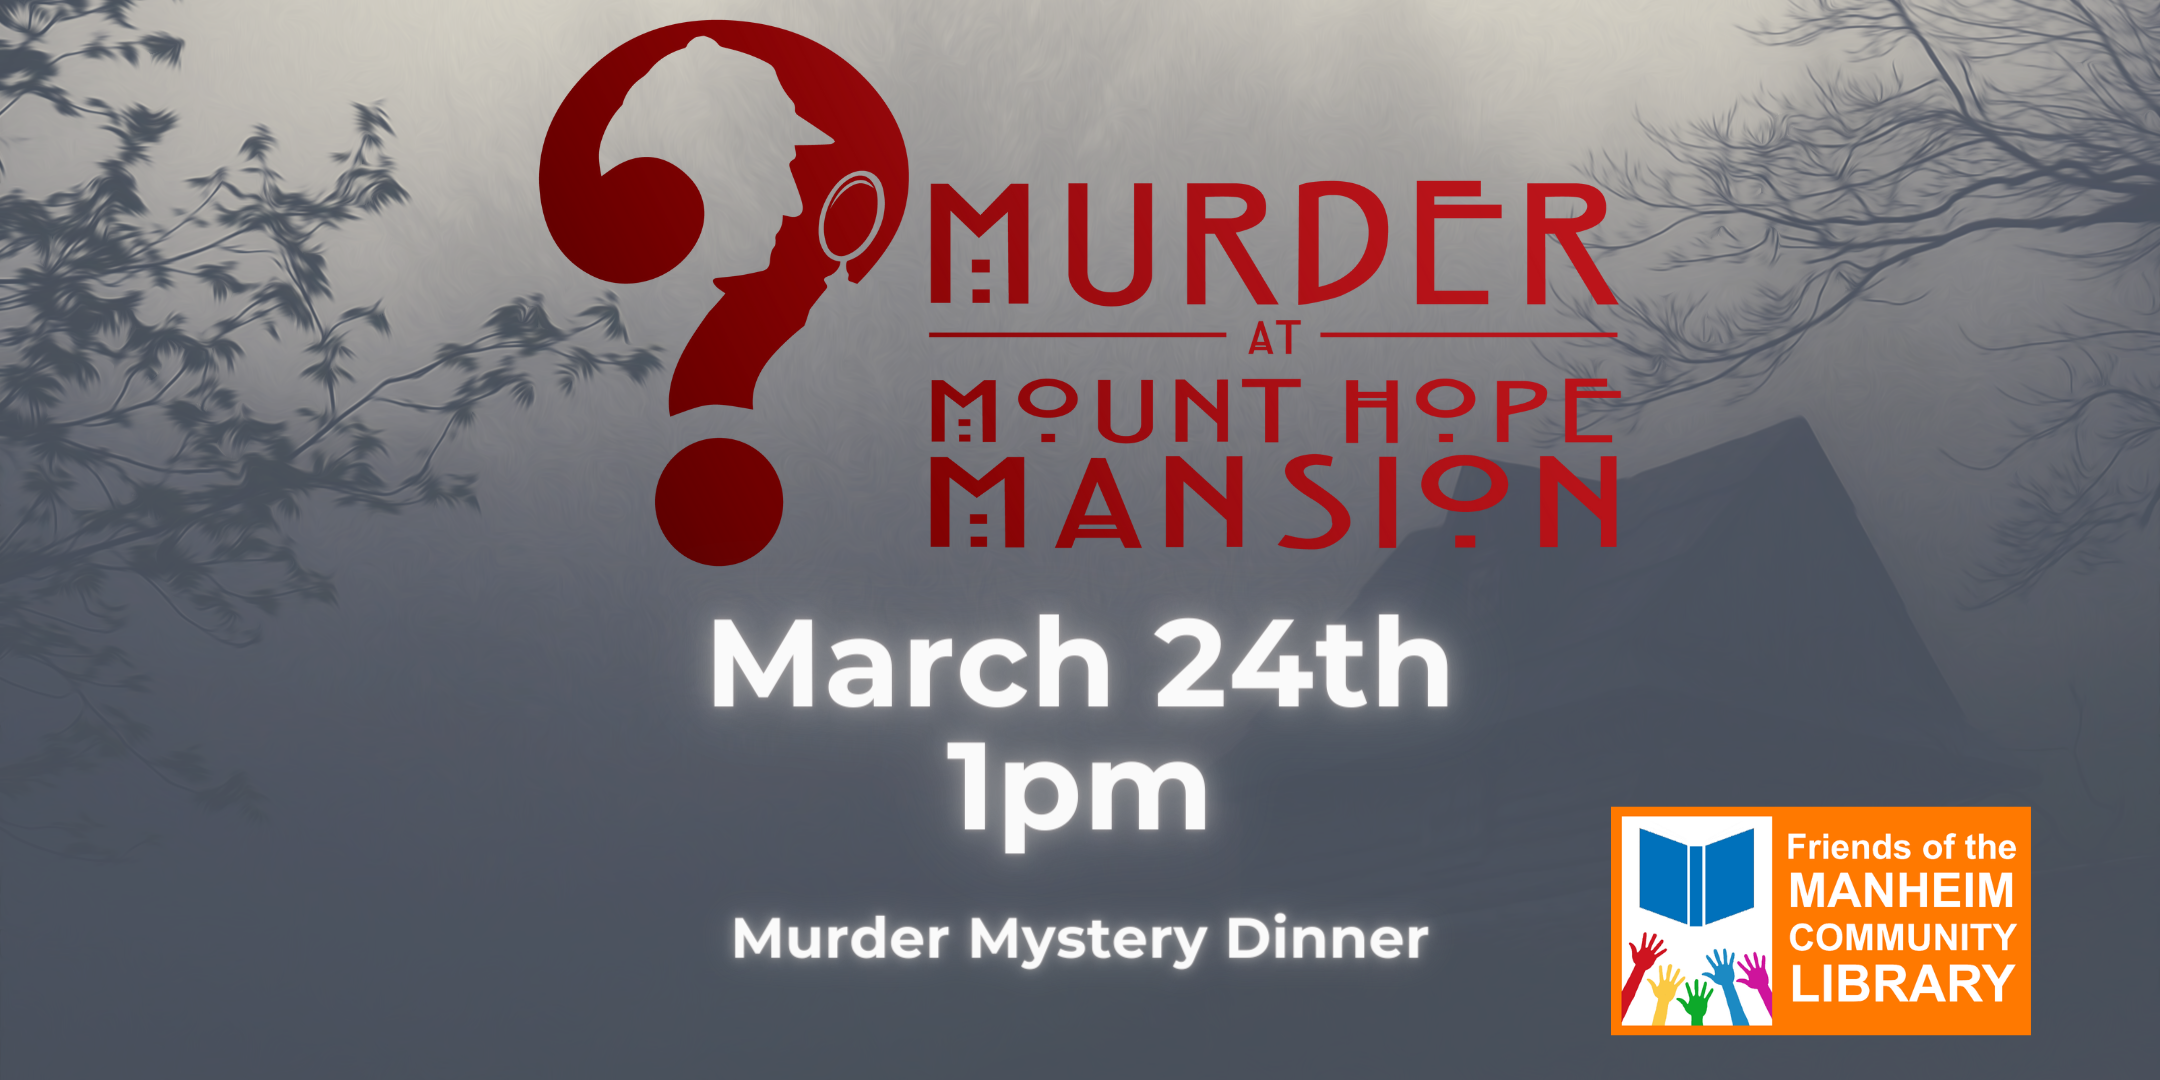 Murder at Mt. Hope Mansion March 24th at 1pm. Murder mystery dinner